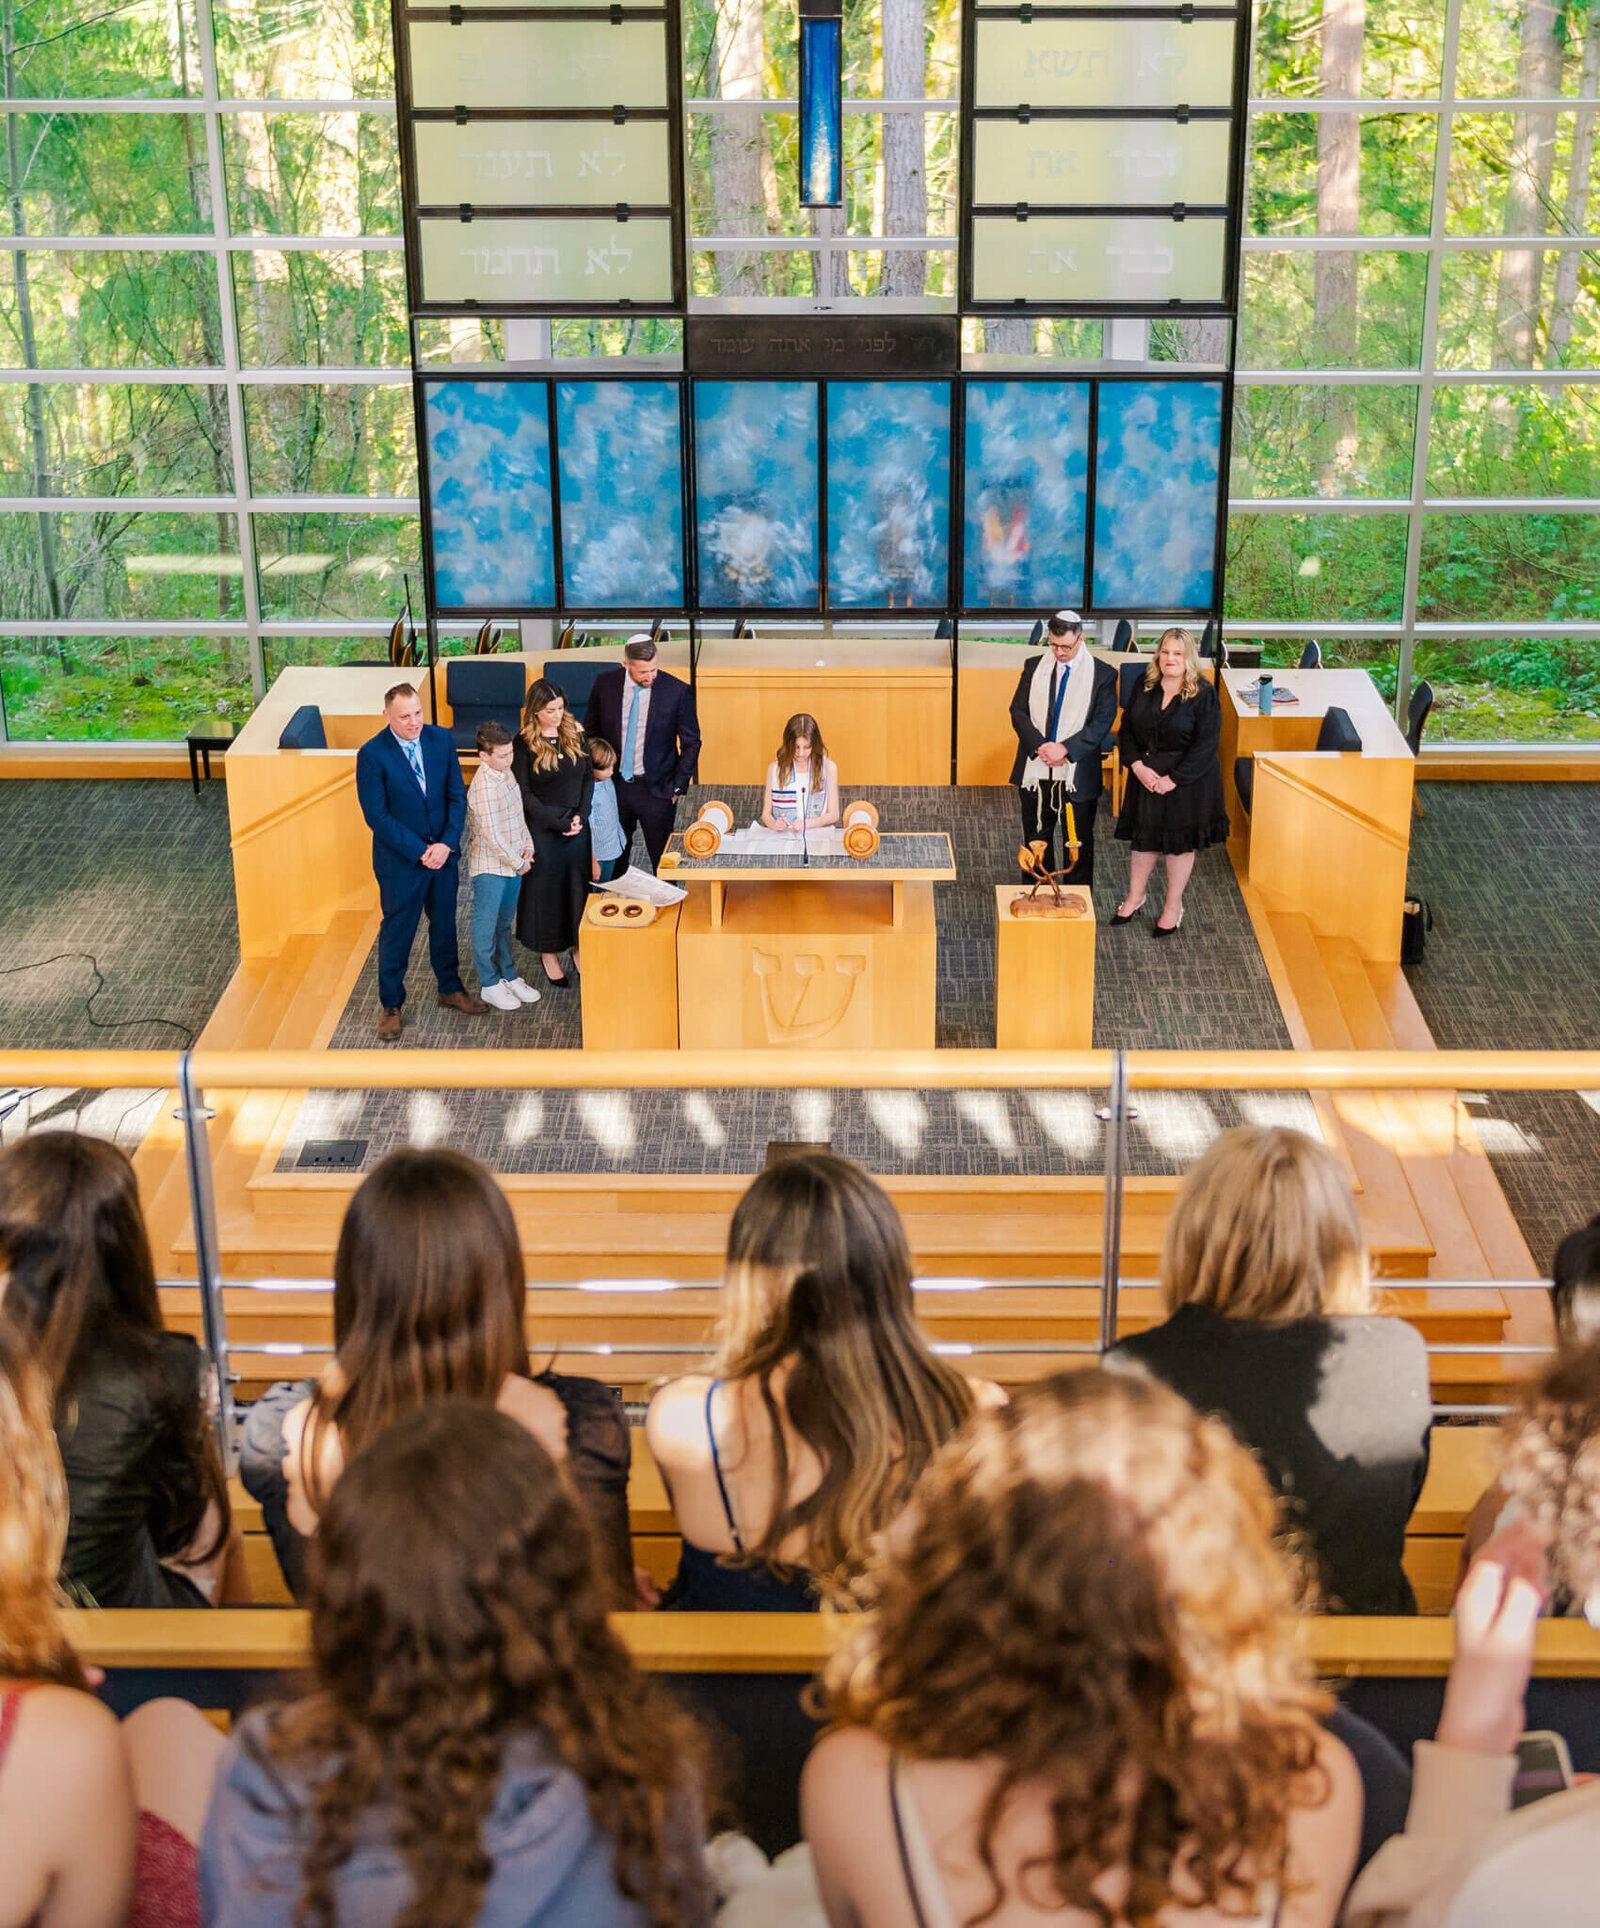 A Bellevue Bar and Bat Mitzvah Photography view from the balcony of a teen girl performing her haftarah at the Bimah